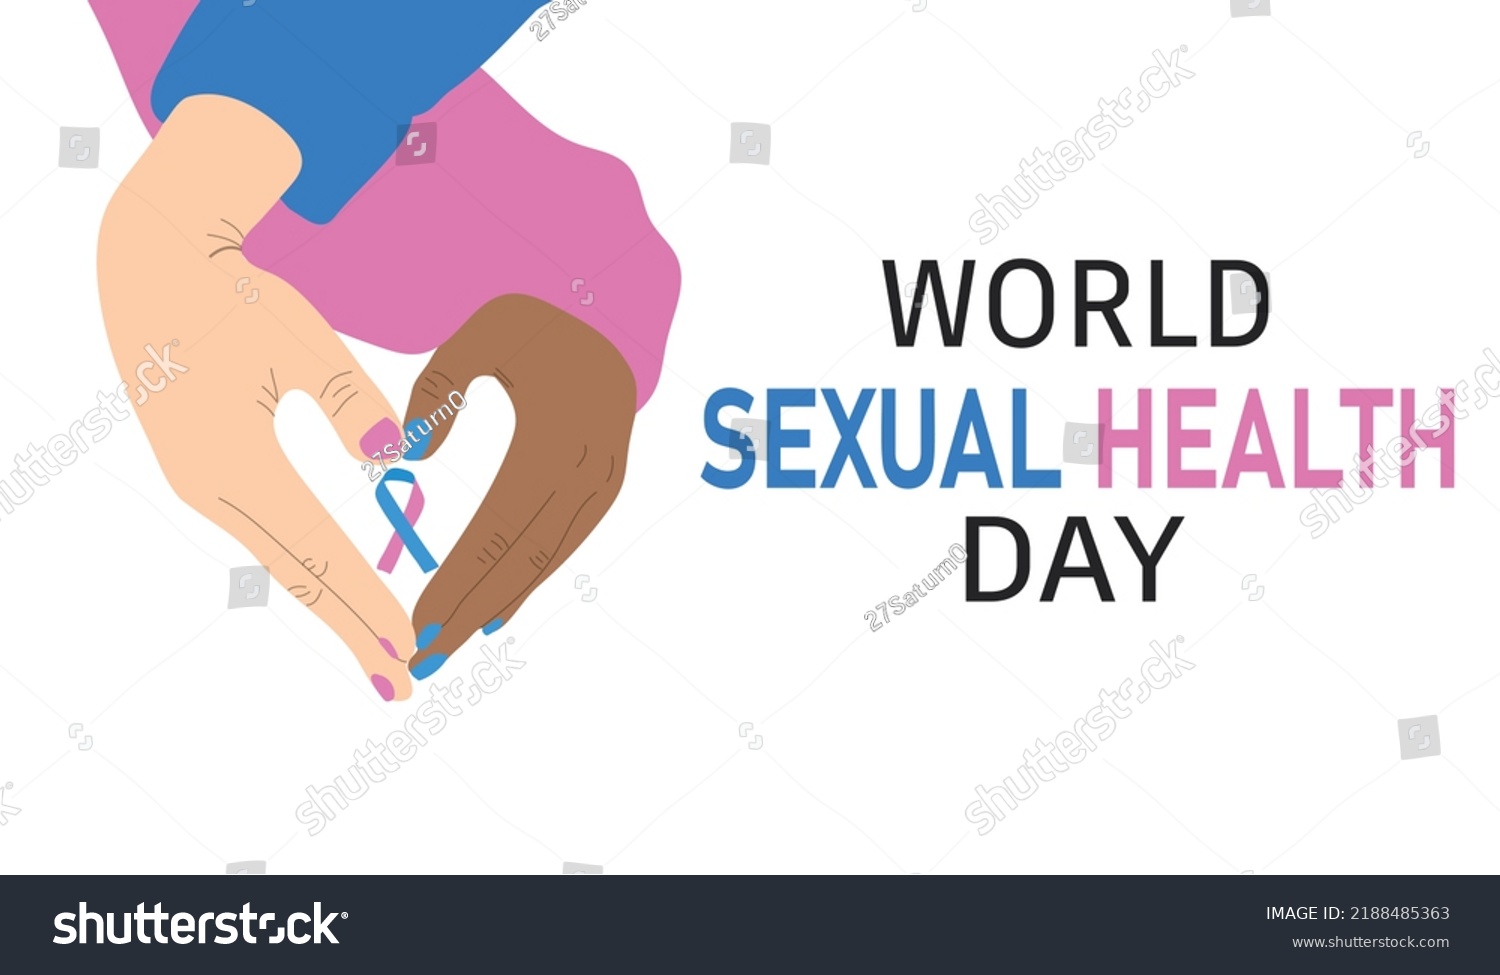 World Sexual Health Day Banner Hands Stock Vector Royalty Free 2188485363 Shutterstock 